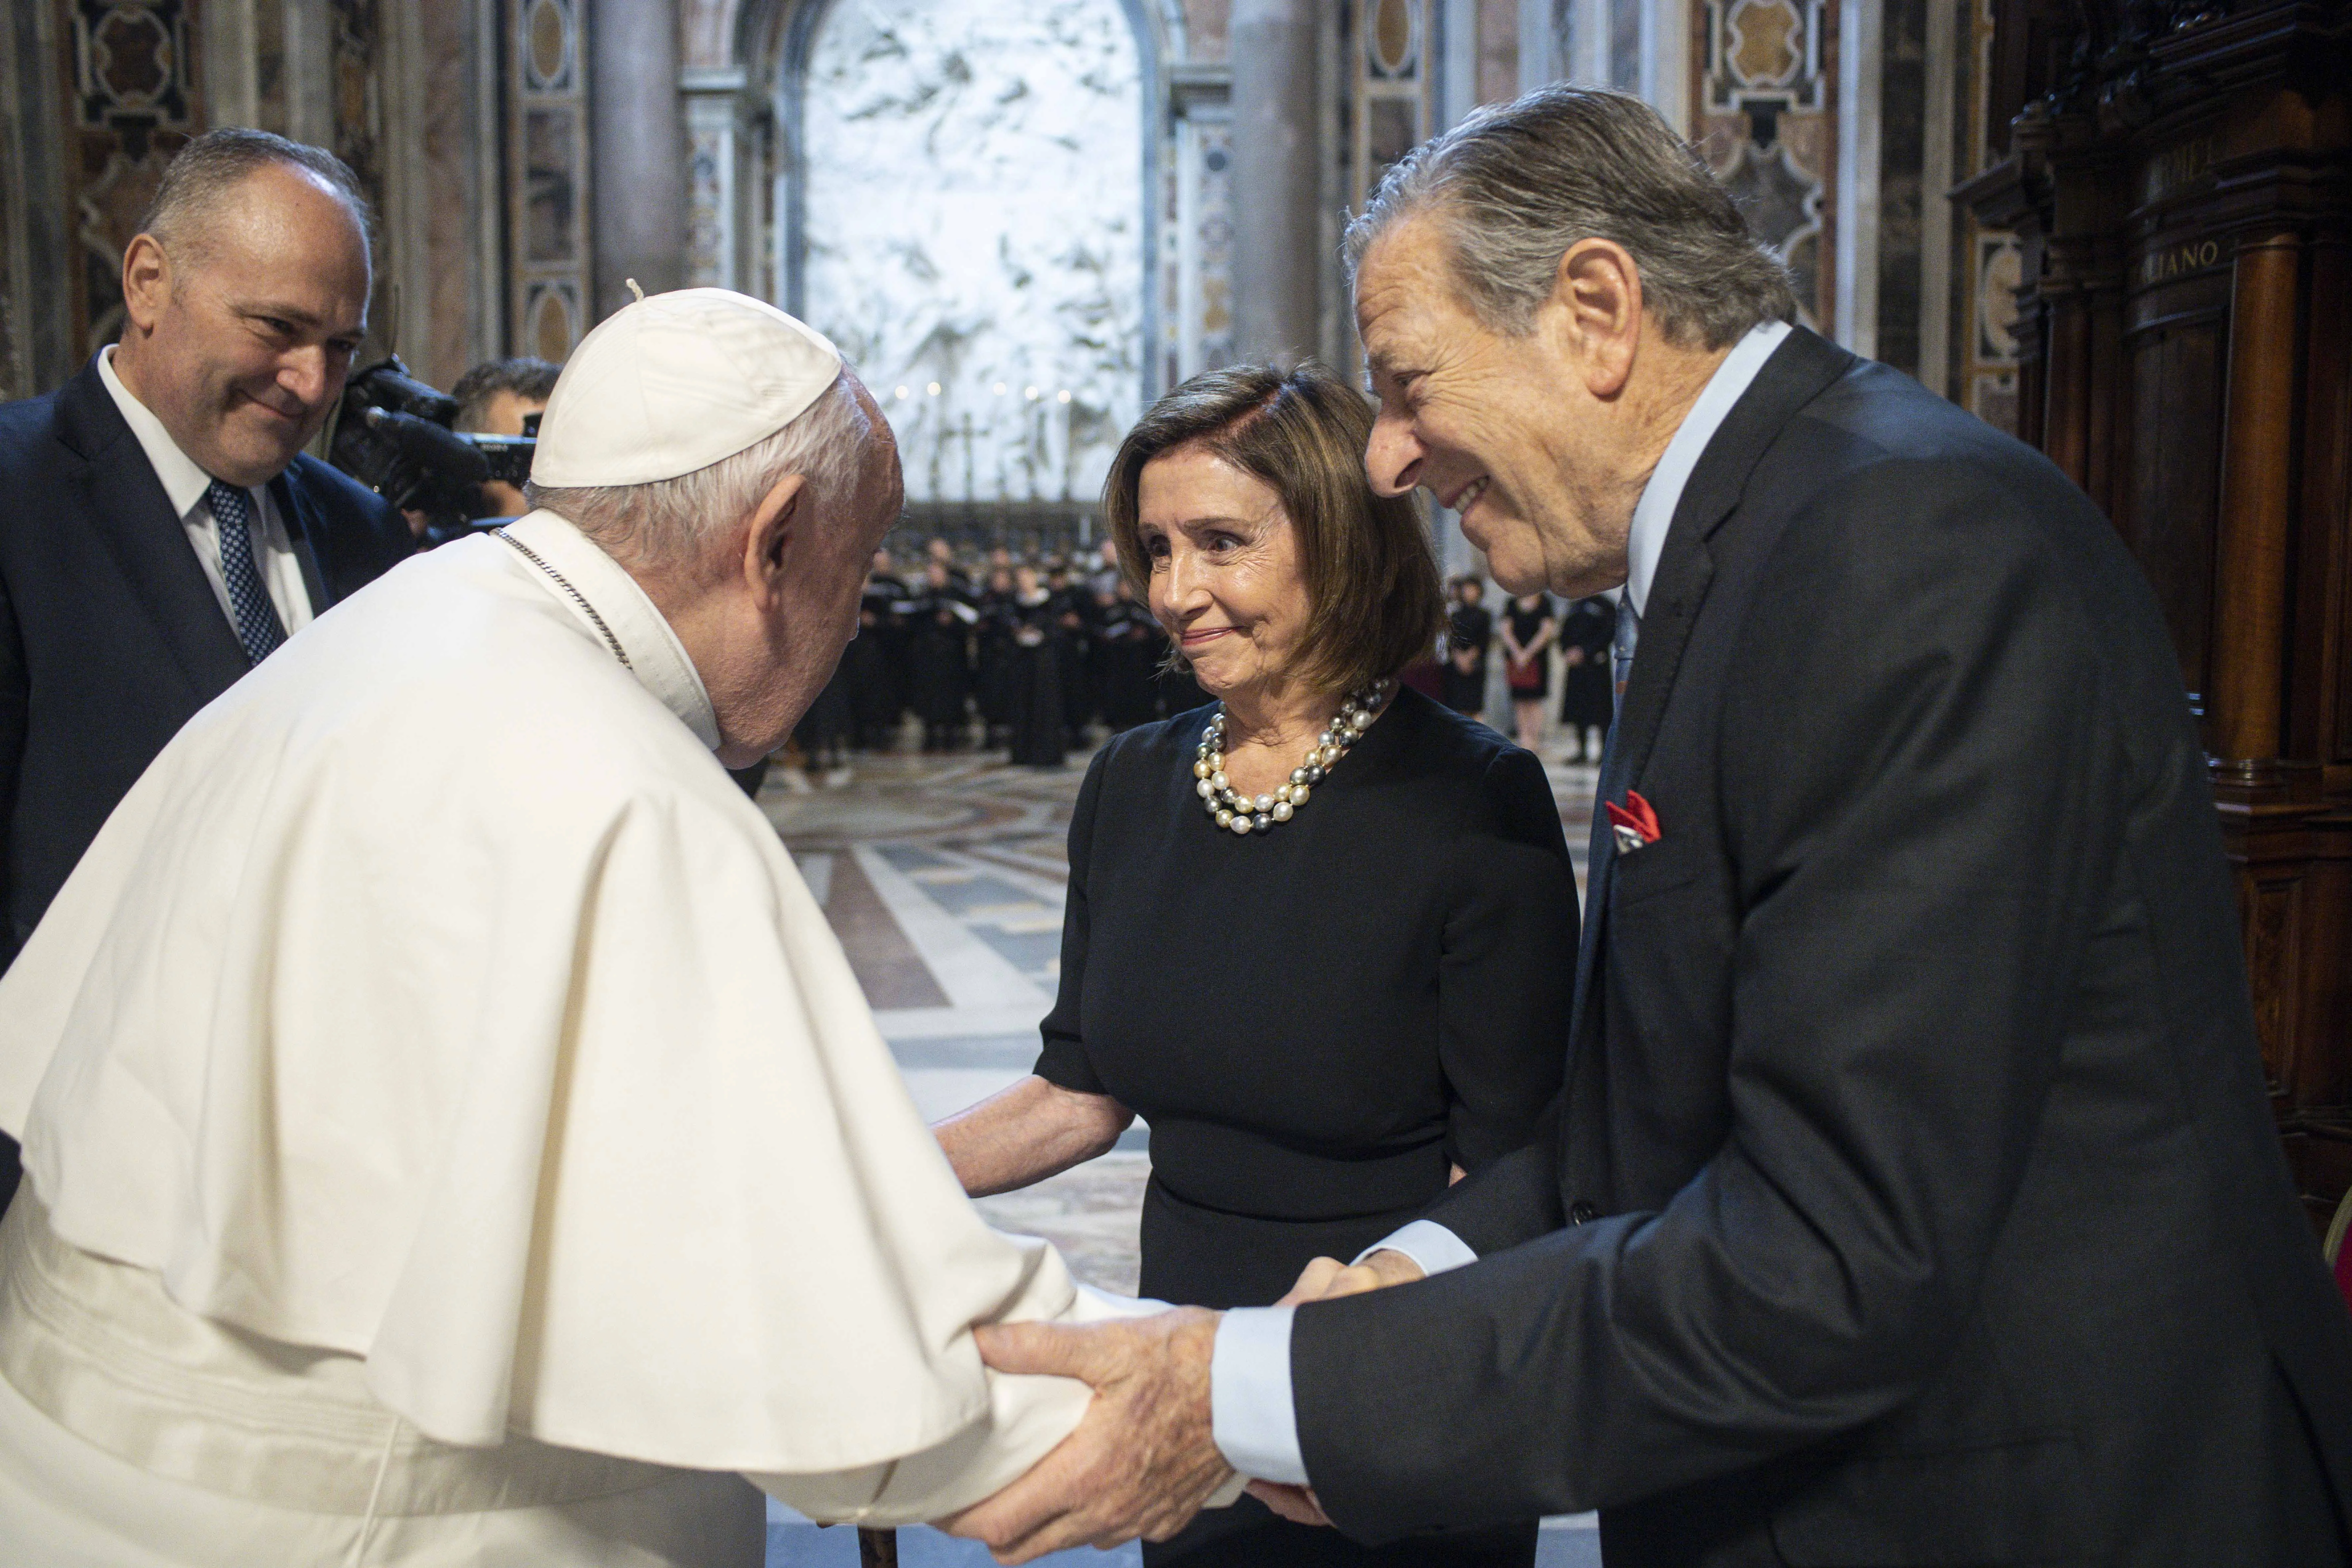 Pope Francis greets House Speaker Nancy Pelosi and Paul Pelosi in St. Peter's Basilica after Mass on June 29, 2022.?w=200&h=150